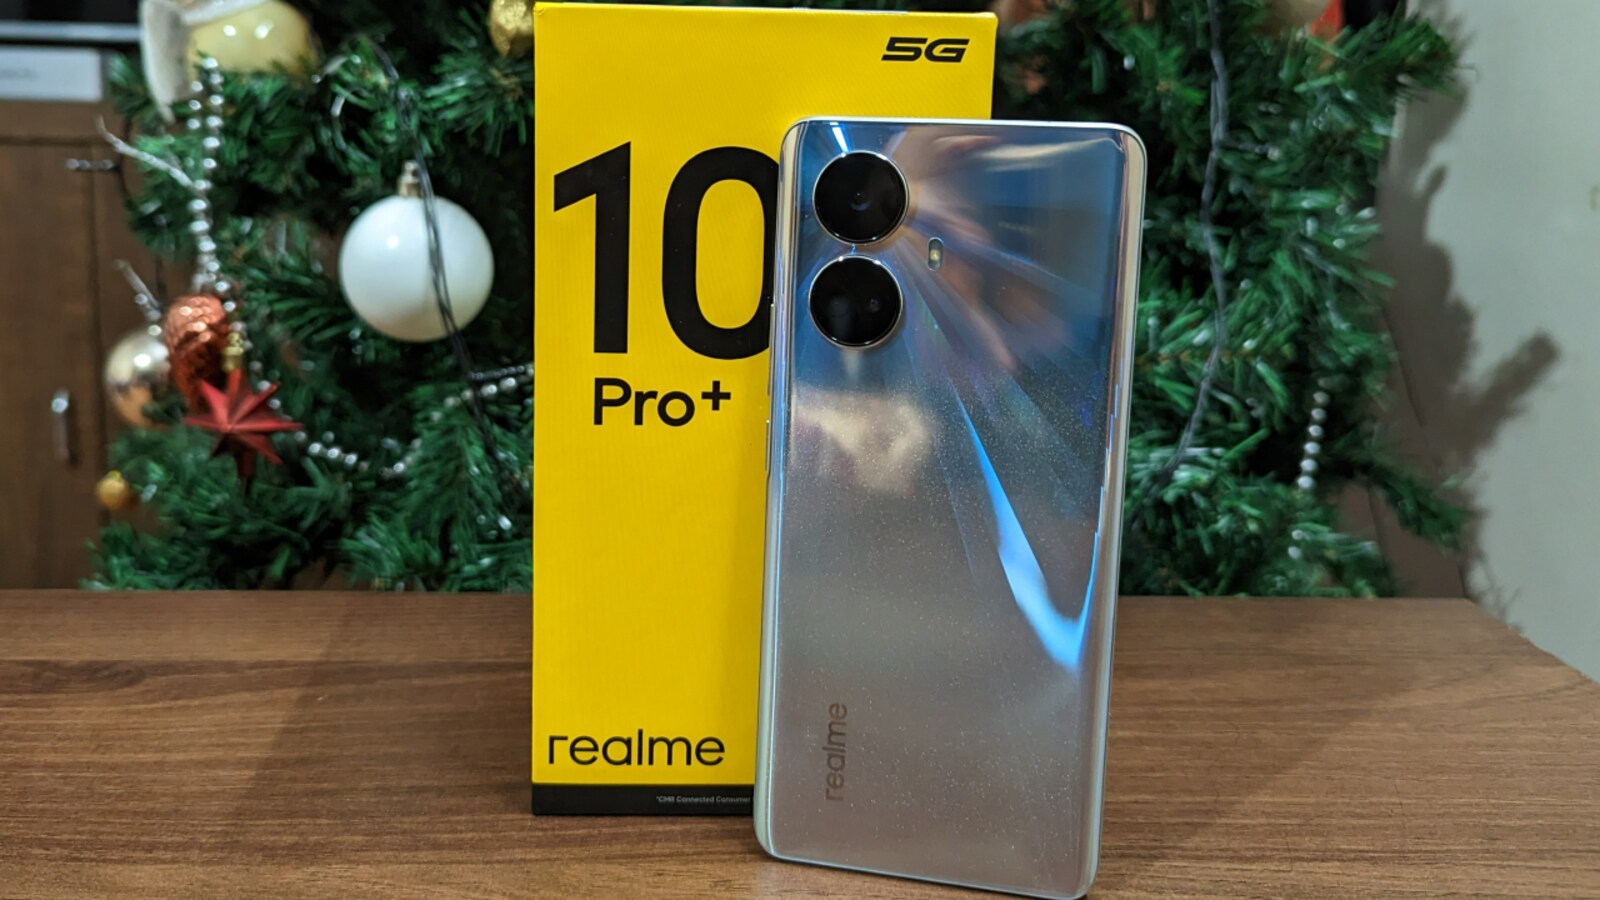 Realme 10 Pro+ 5G review: An all-round midrange phone set back by